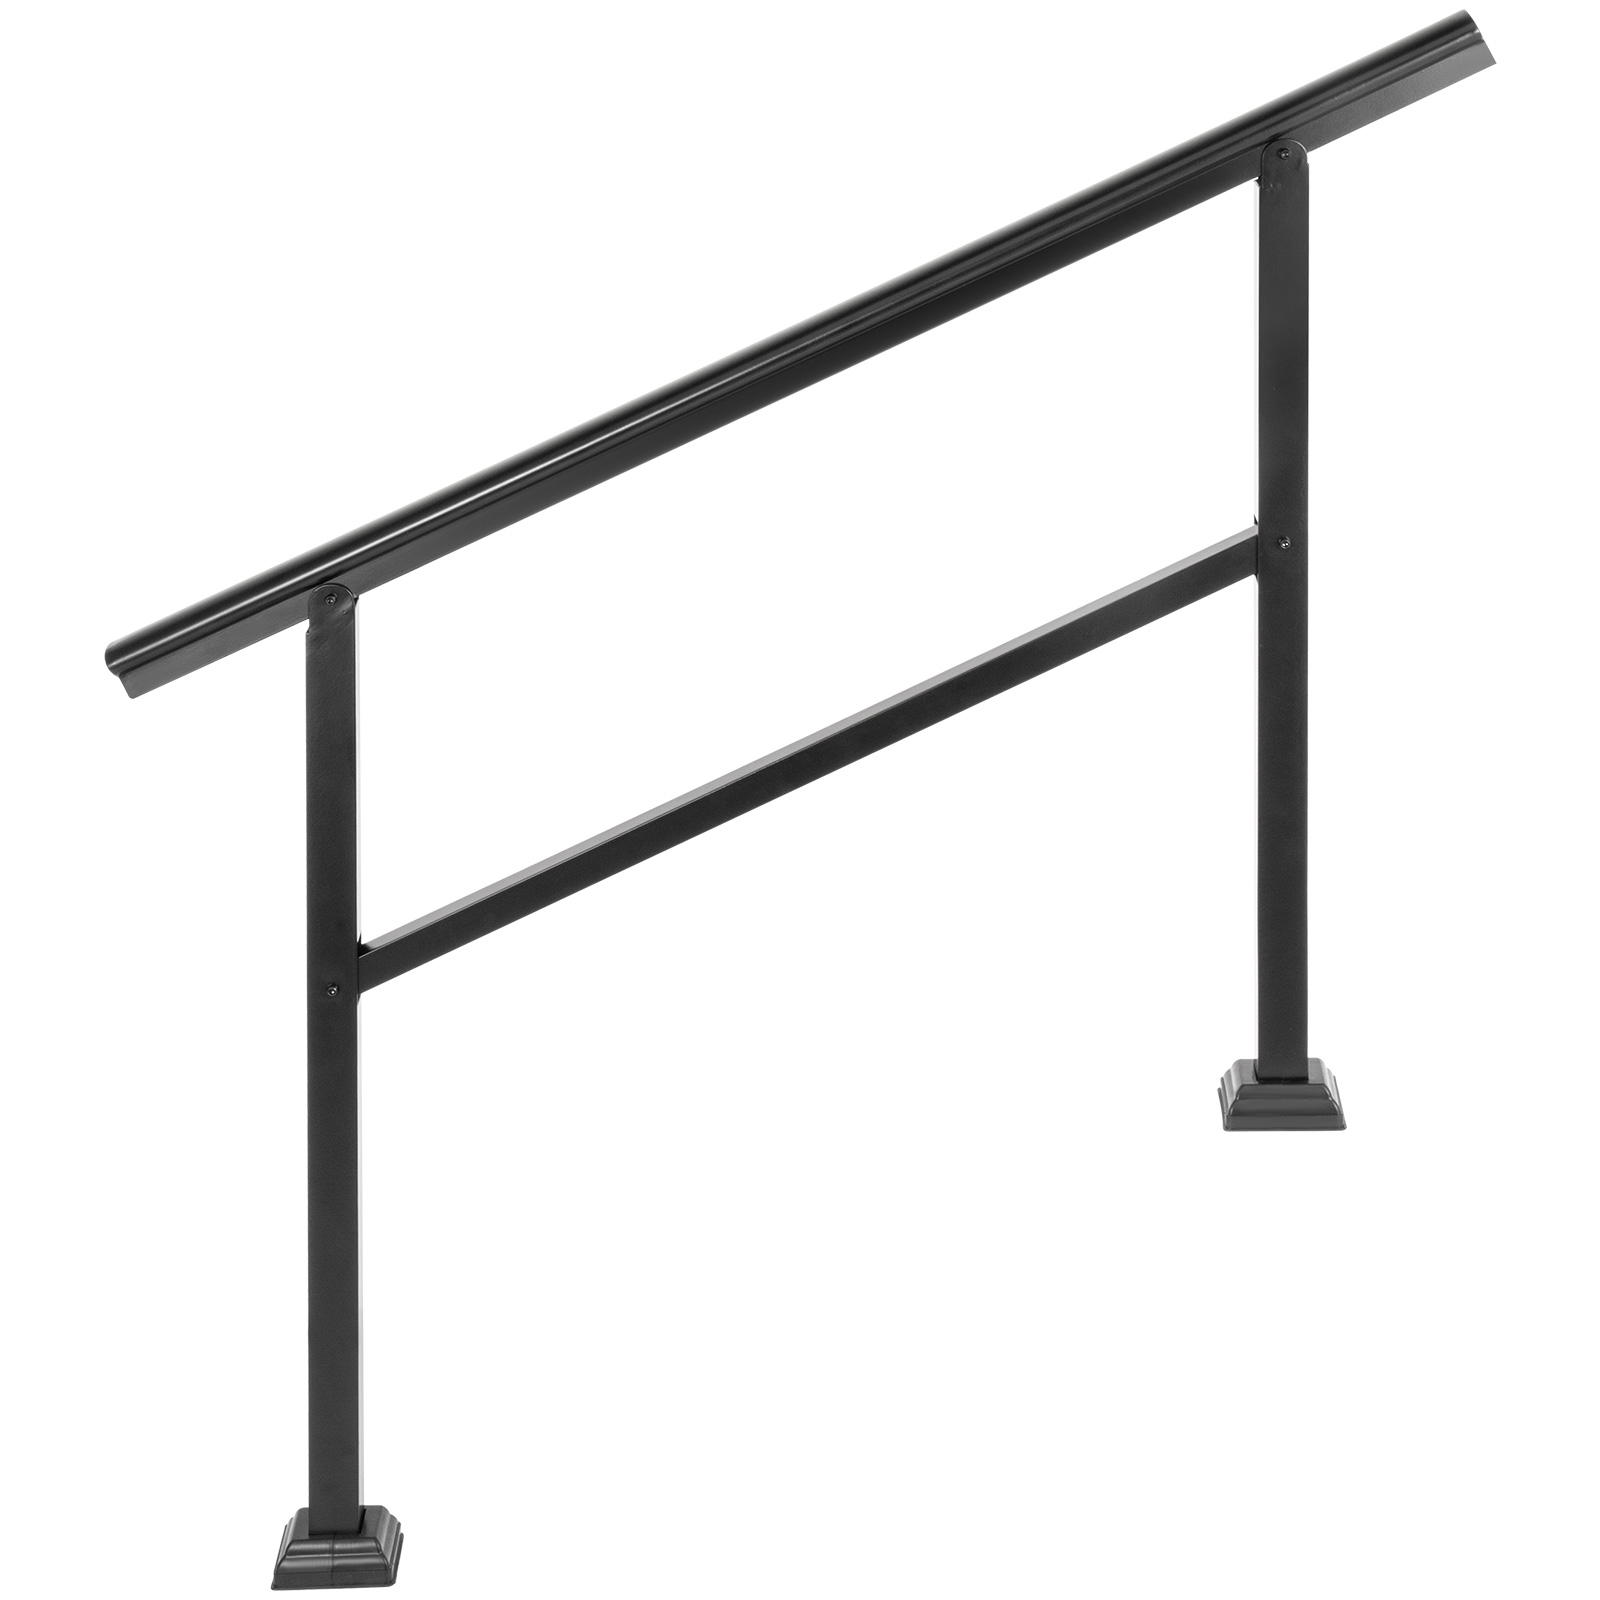 Vevor Handrail Outdoor Stairs Outdoor Handrail Aluminum Fits 2 5 Steps